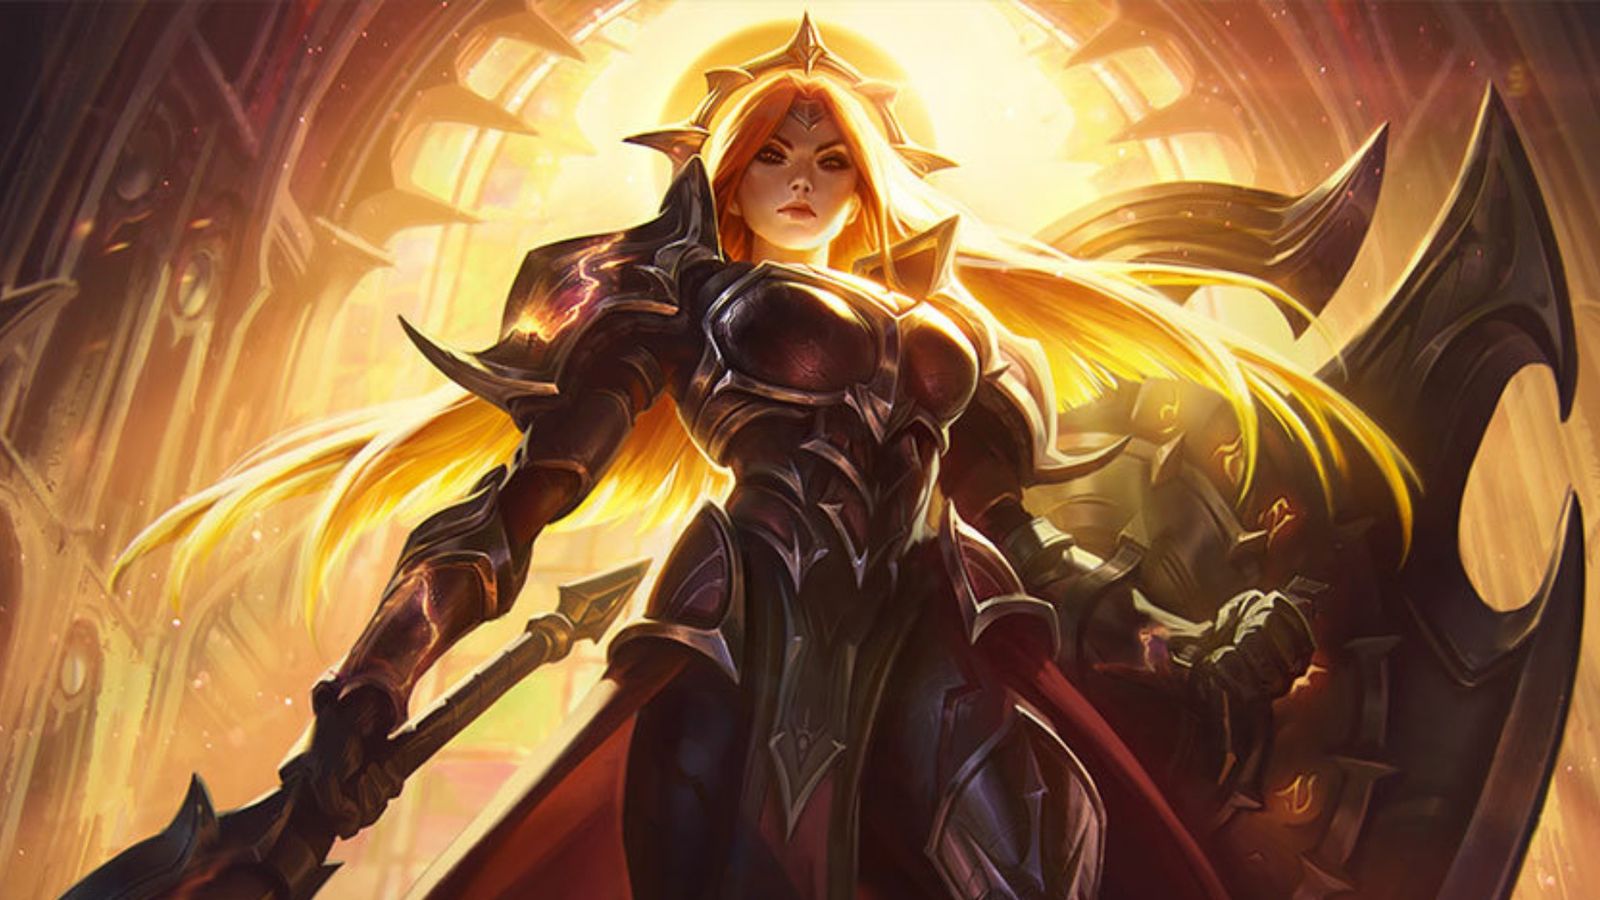 Leona from League of Legends, depicted in radiant armor with a shield and spear, standing in a majestic pose with sunlight illuminating her from behind. She is used to fix the LoL Surprise for Seraphine 2 not working issue. 